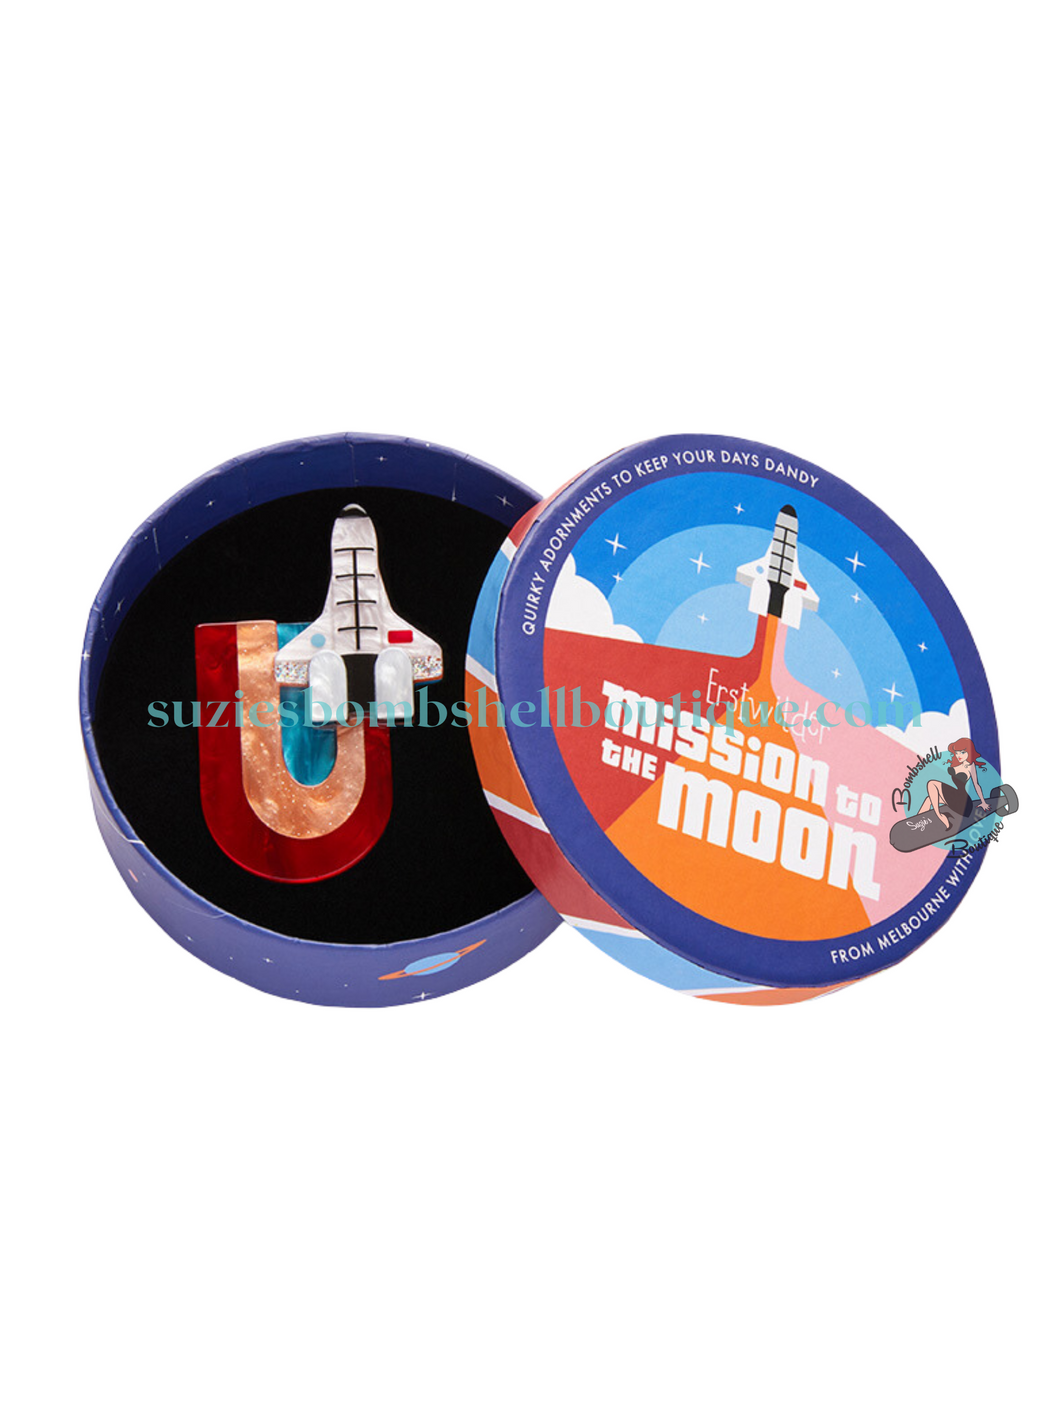 Erstwilder Mission To The Moon Brooch acrylic resin pin of the first shuttle spaceship to fly to space from United States Apollo 11 retro vintage 60s pinup costume jewellery Canadian Pin-Up Shop Suzie's Bombshell Boutique